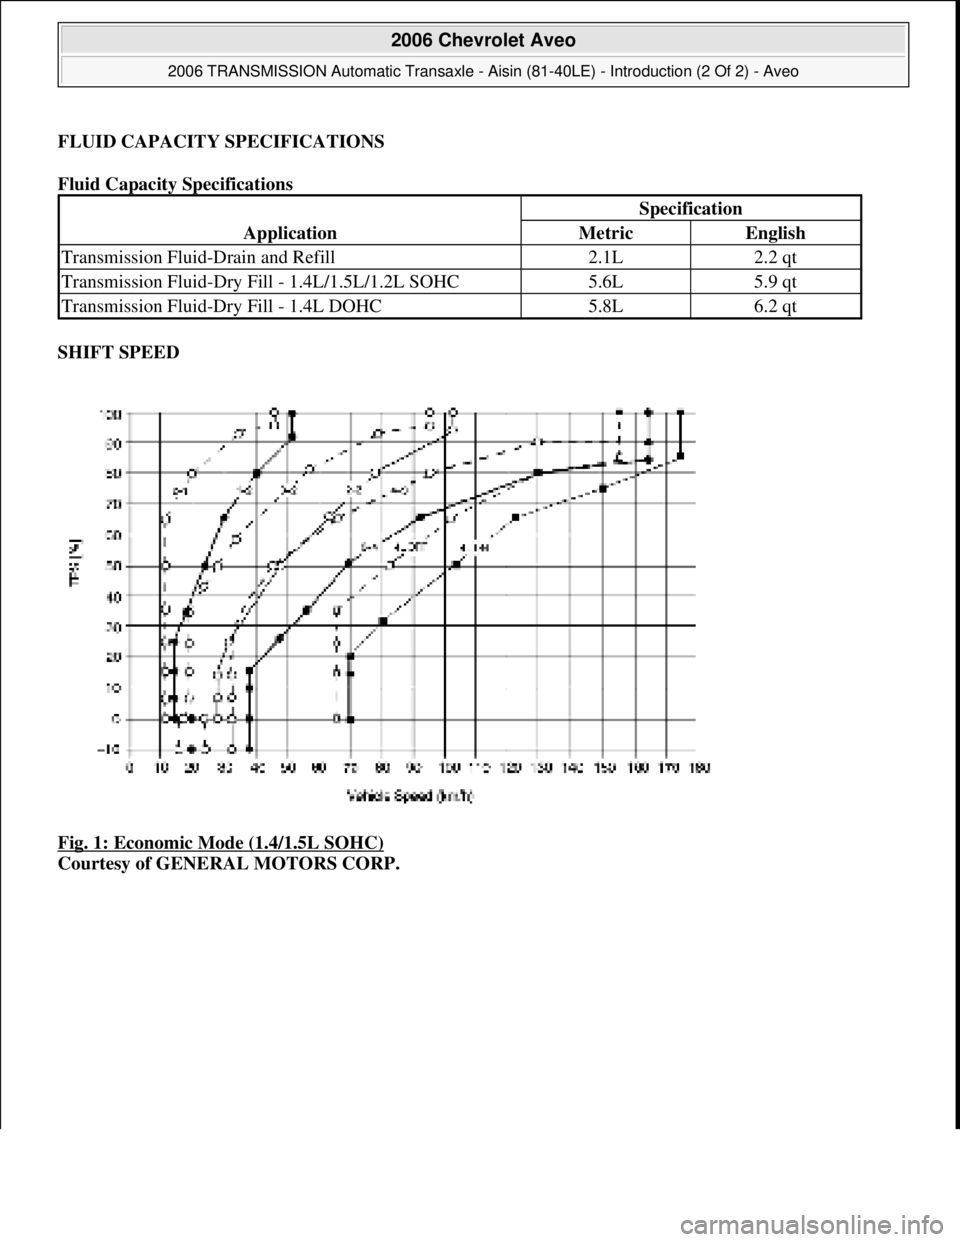 CHEVROLET AVEO 2002  Service Repair Manual FLUID CAPACITY SPECIFICATIONS 
Fluid Capacity Specifications 
SHIFT SPEED 
Fig. 1: Economic Mode (1.4/1.5L SOHC)
 
Courtesy of GENERAL MOTORS CORP.
Application
Specification
MetricEnglish
Transmission